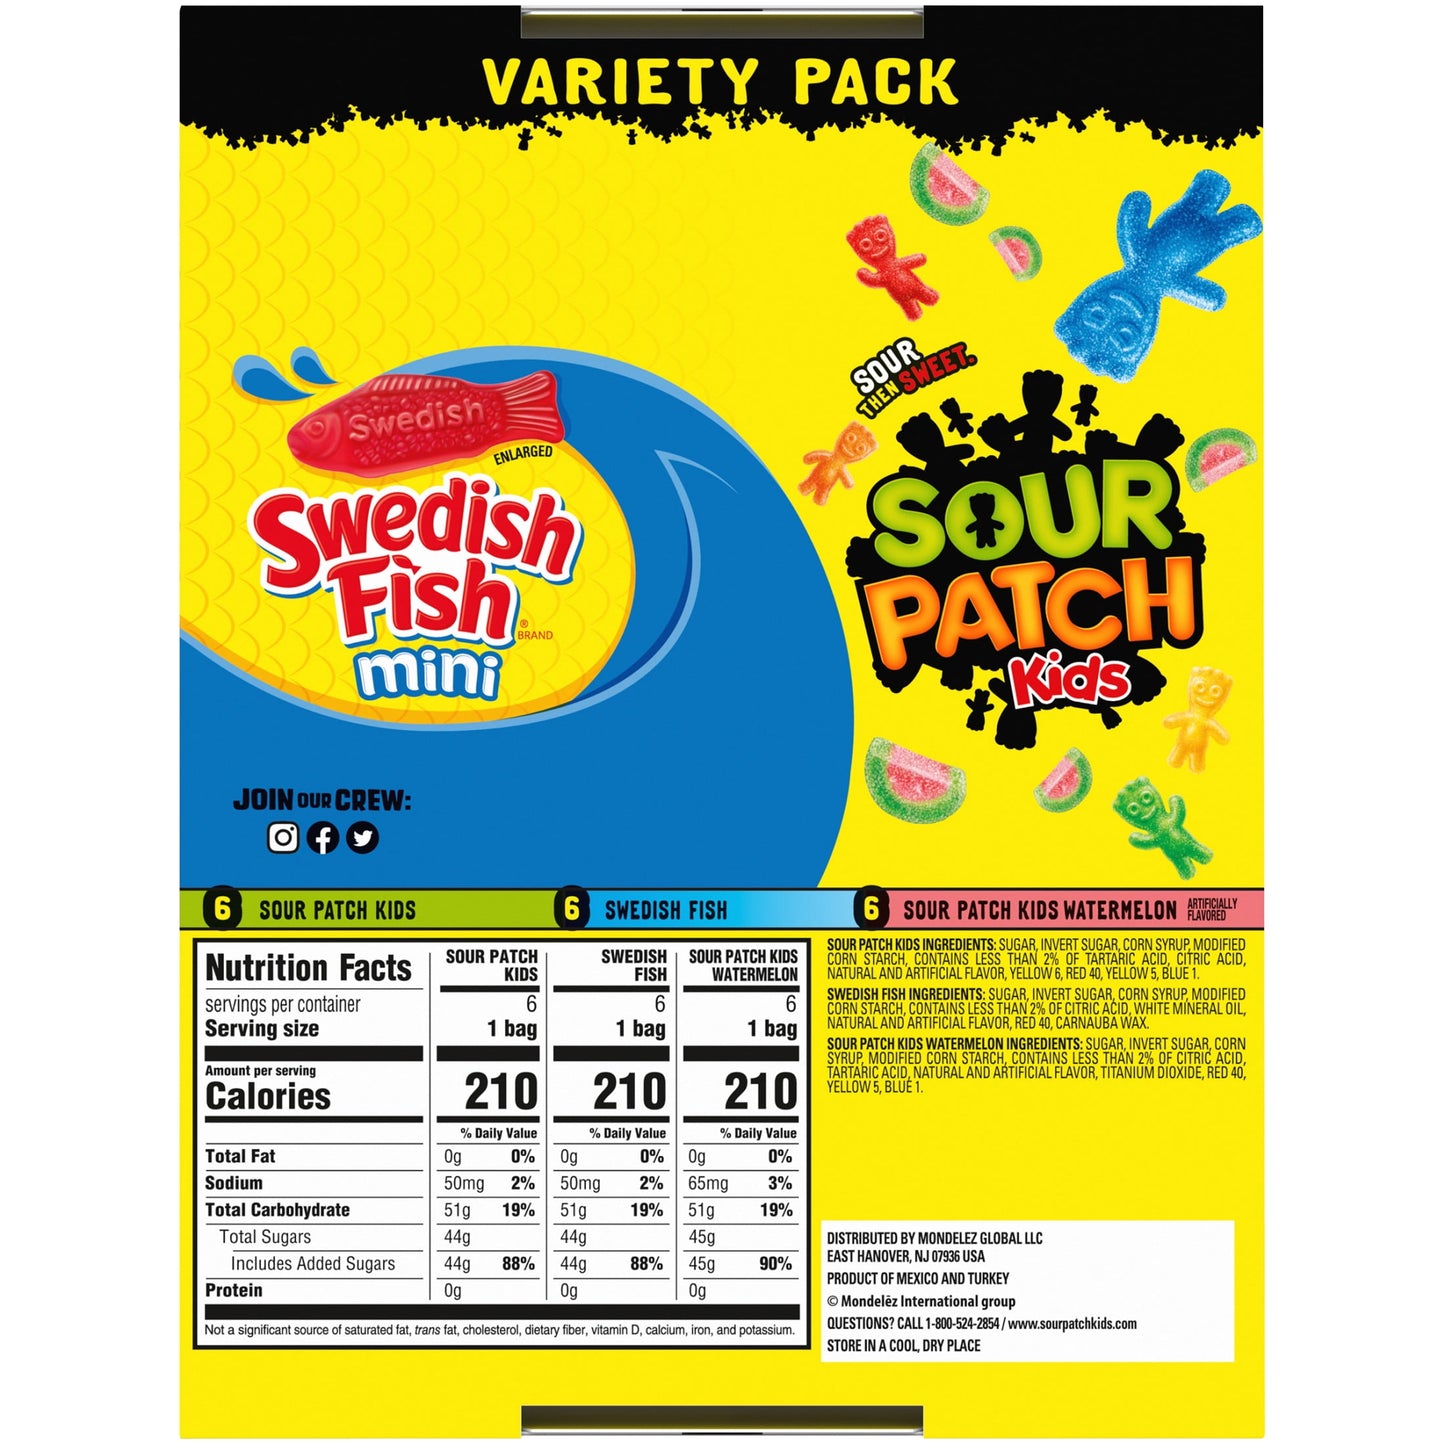 and SWEDISH FISH Mini Soft & Chewy Candy Variety Pack, 18 - 2 Oz Bags